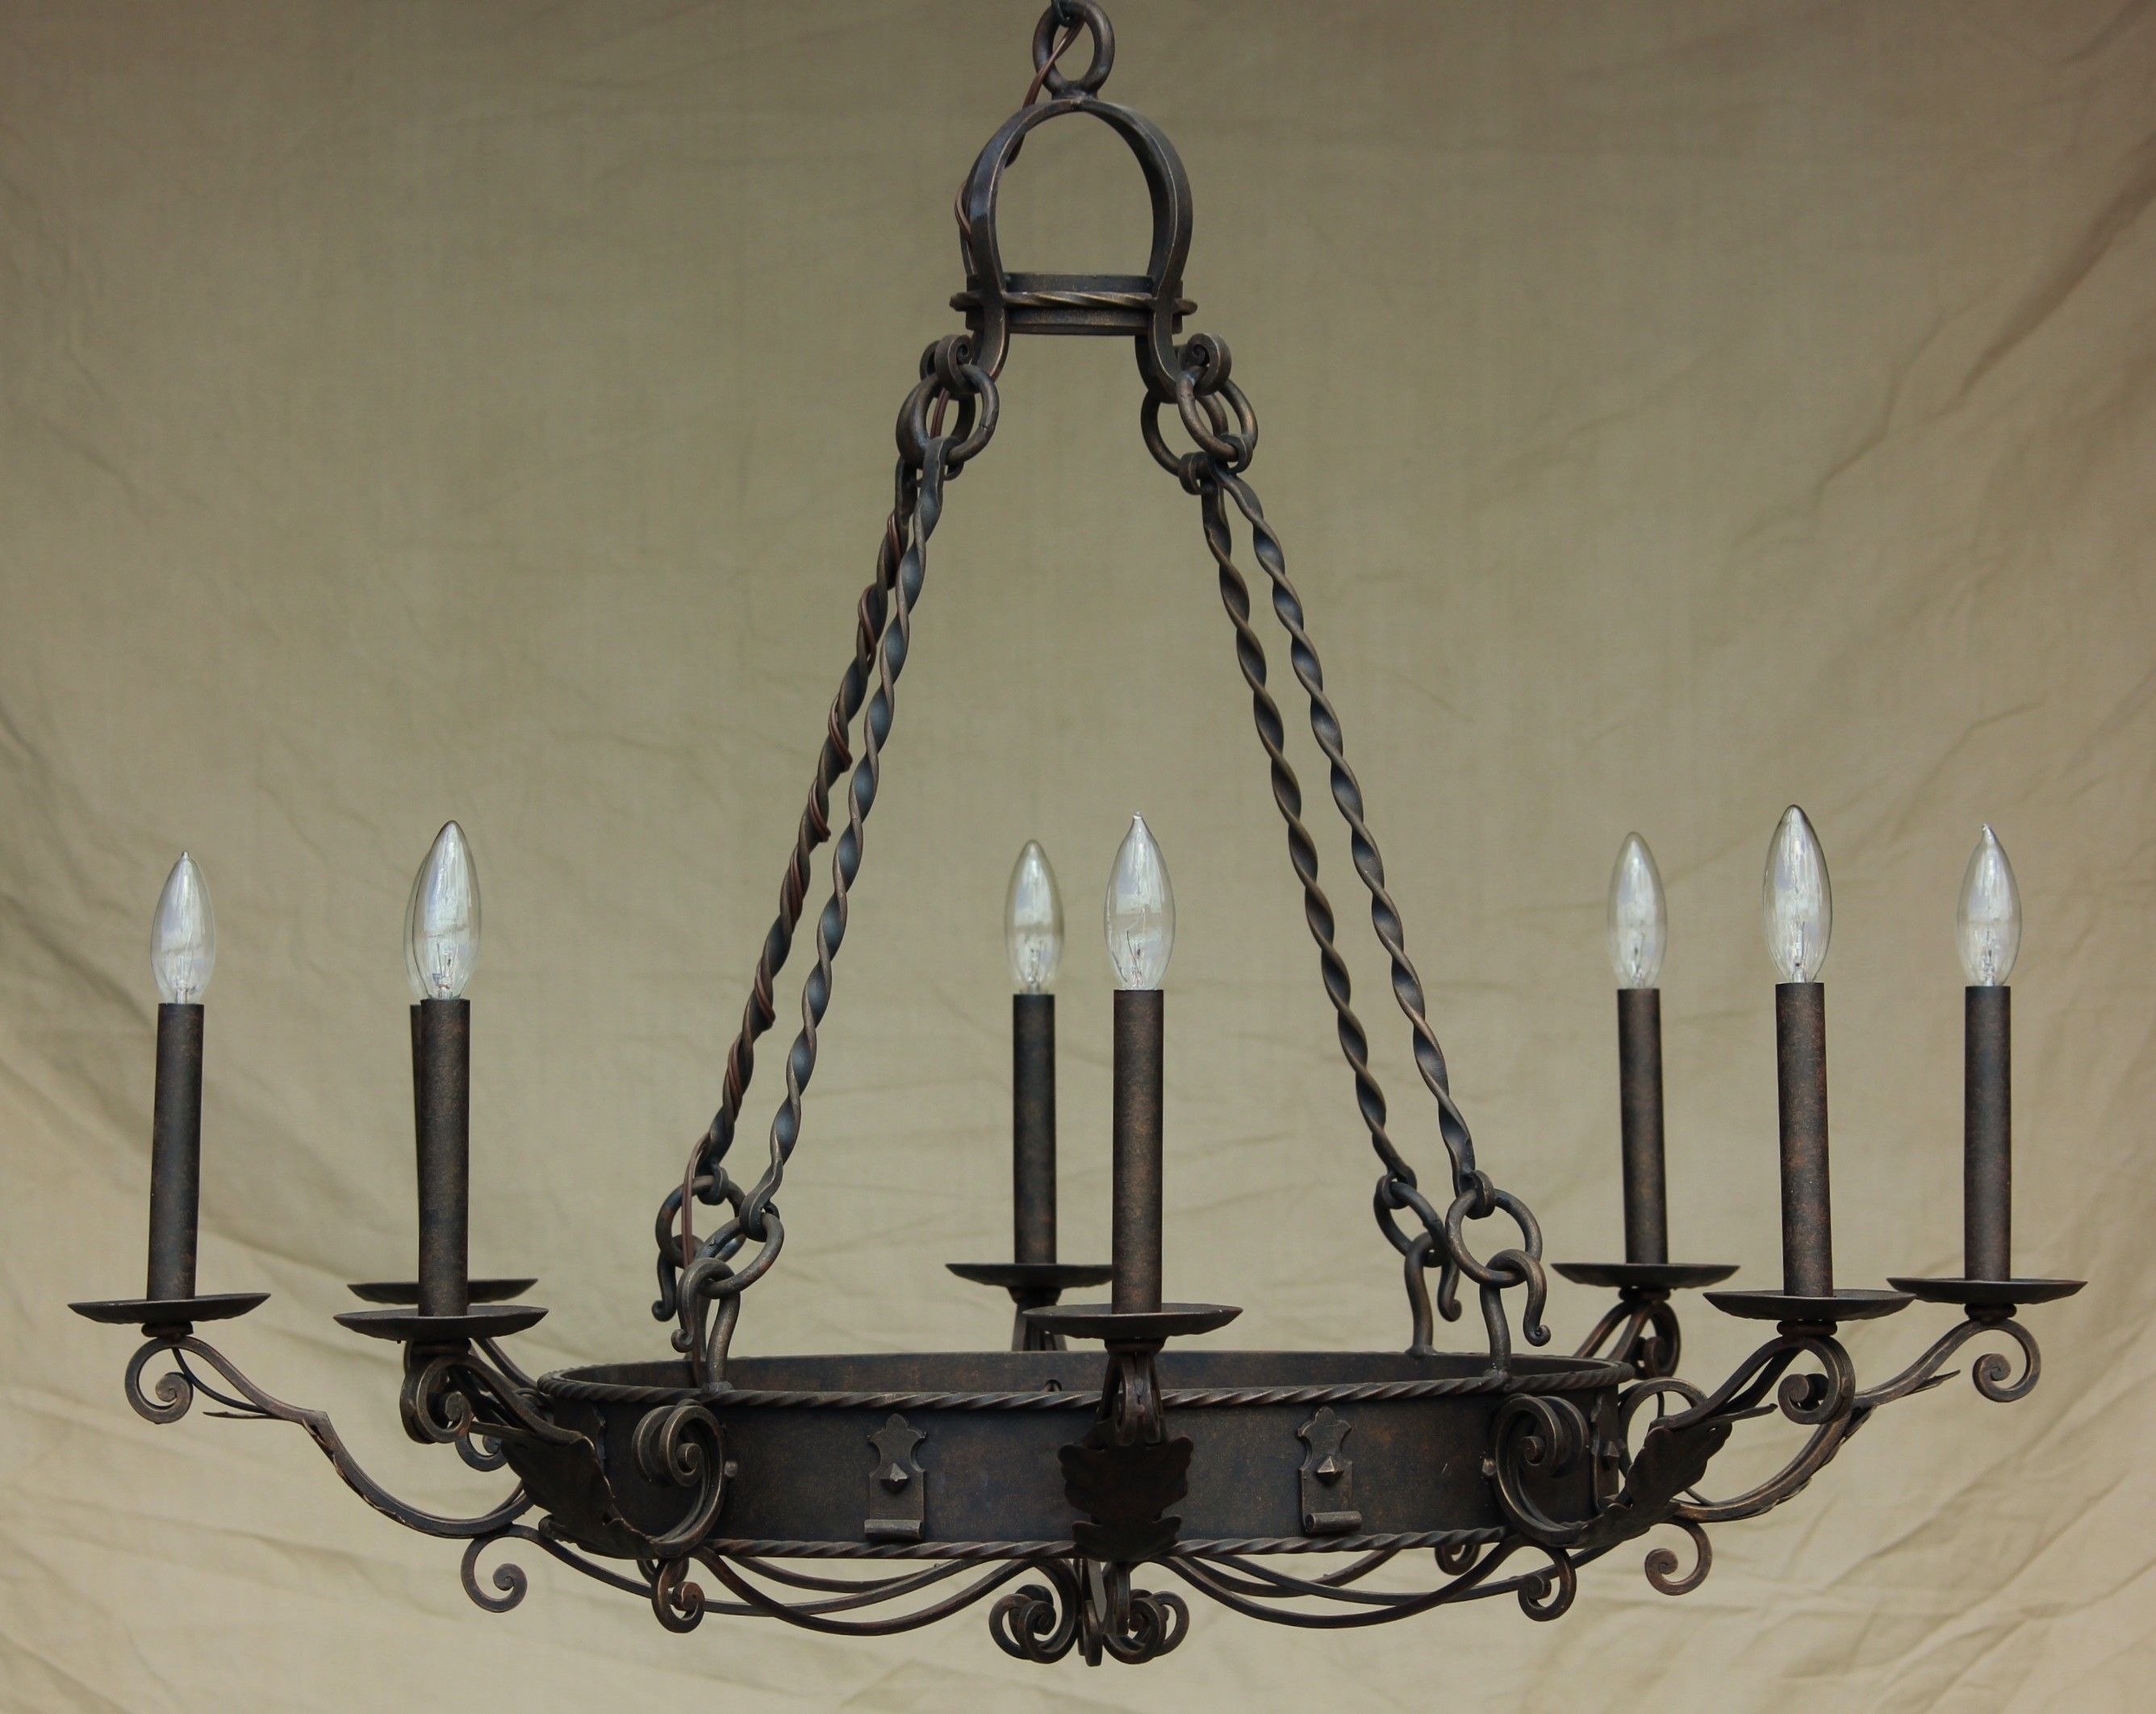 Furniture Modern Wrought Iron Chandelier Bulb For Living Room Throughout Modern Wrought Iron Chandeliers (View 10 of 15)